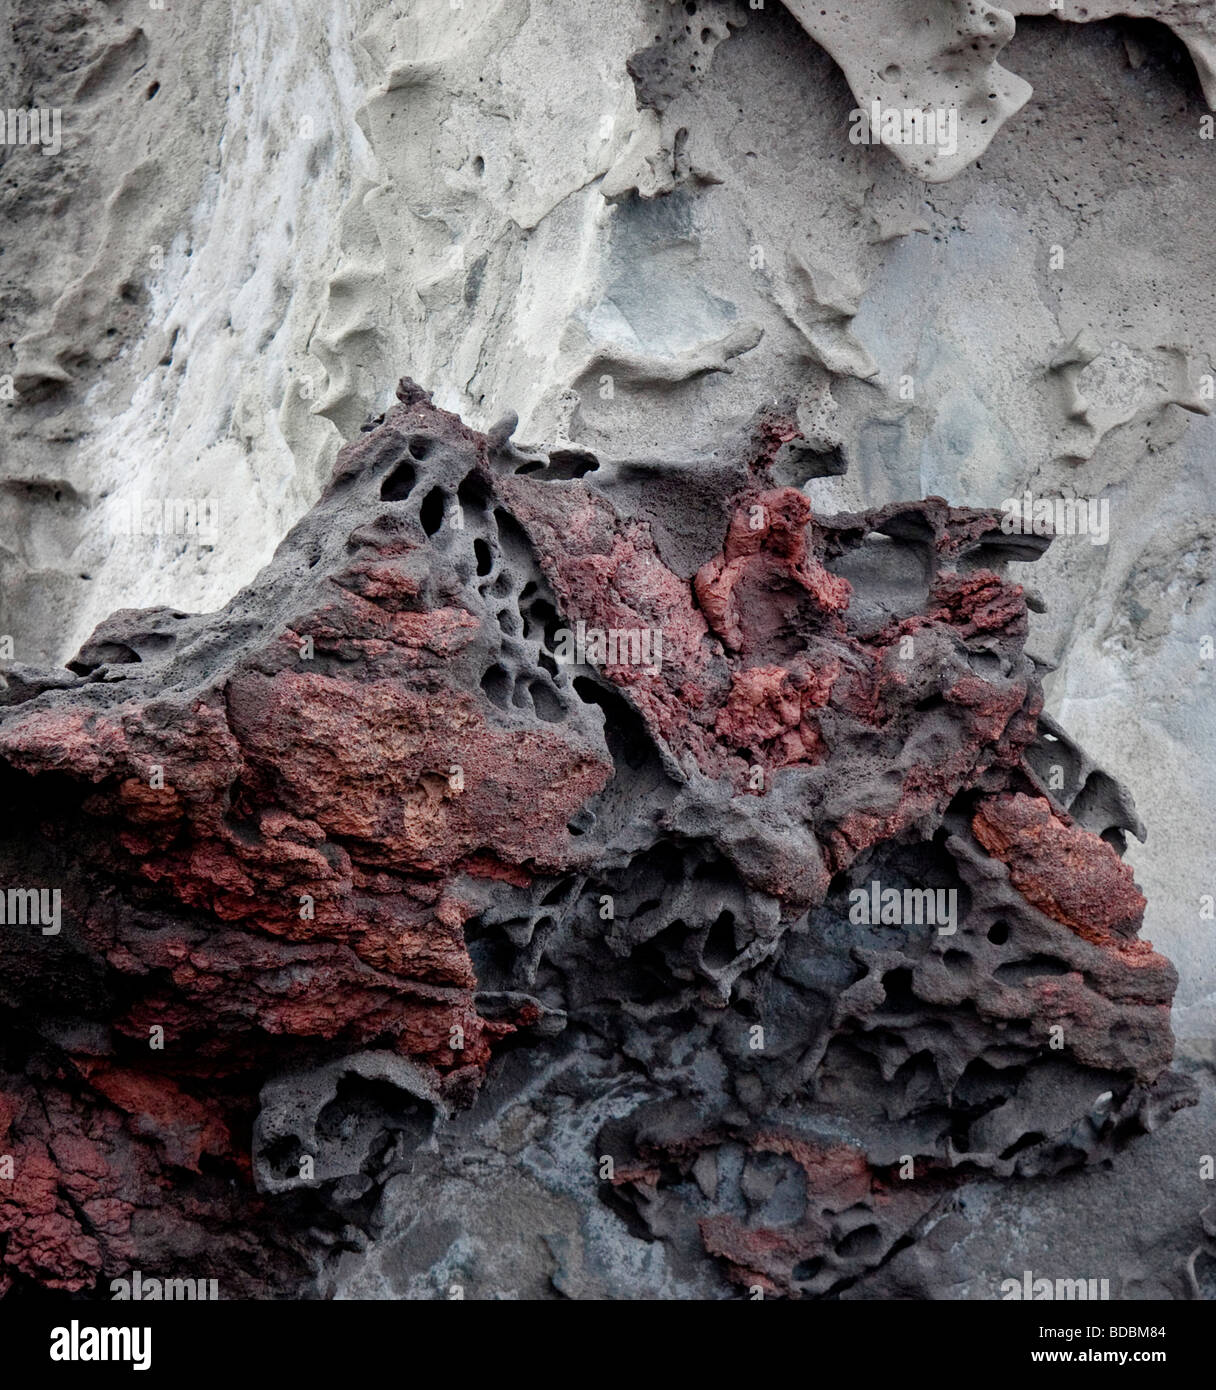 Iron-rich deposits in the volcanic rock give the coast of Bartolome a rich, red color. Stock Photo